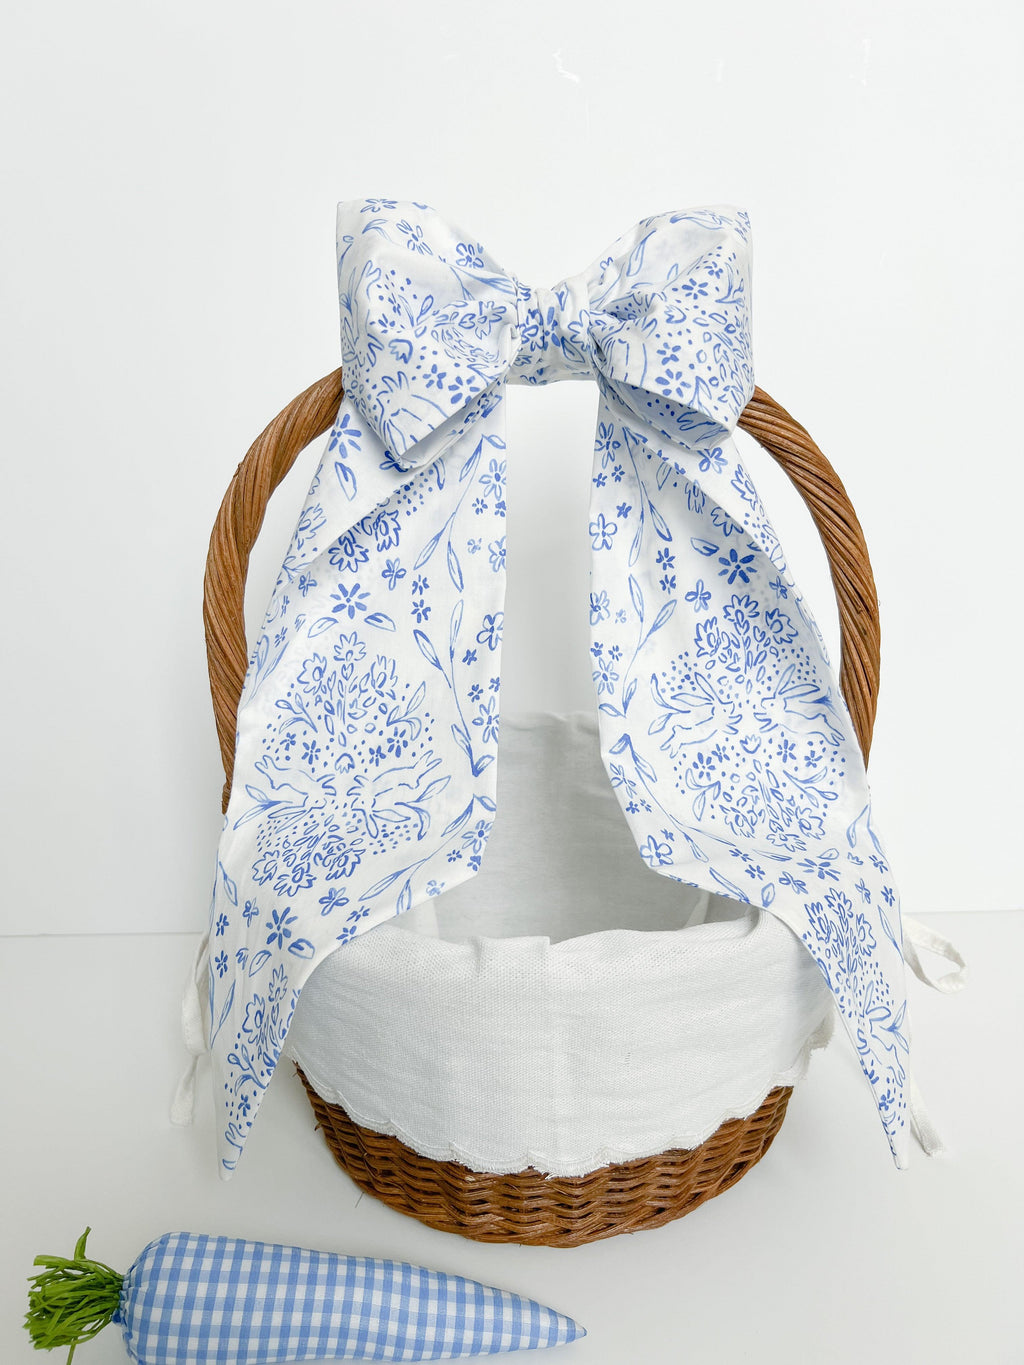 Every Basket Bow - Flor | Nashville Bow Co. - Classic Hair Bows, Bow Ties, Basket Bows, Pacifier Clips, Wreath Sashes, Swaddle Bows. Classic Southern Charm.